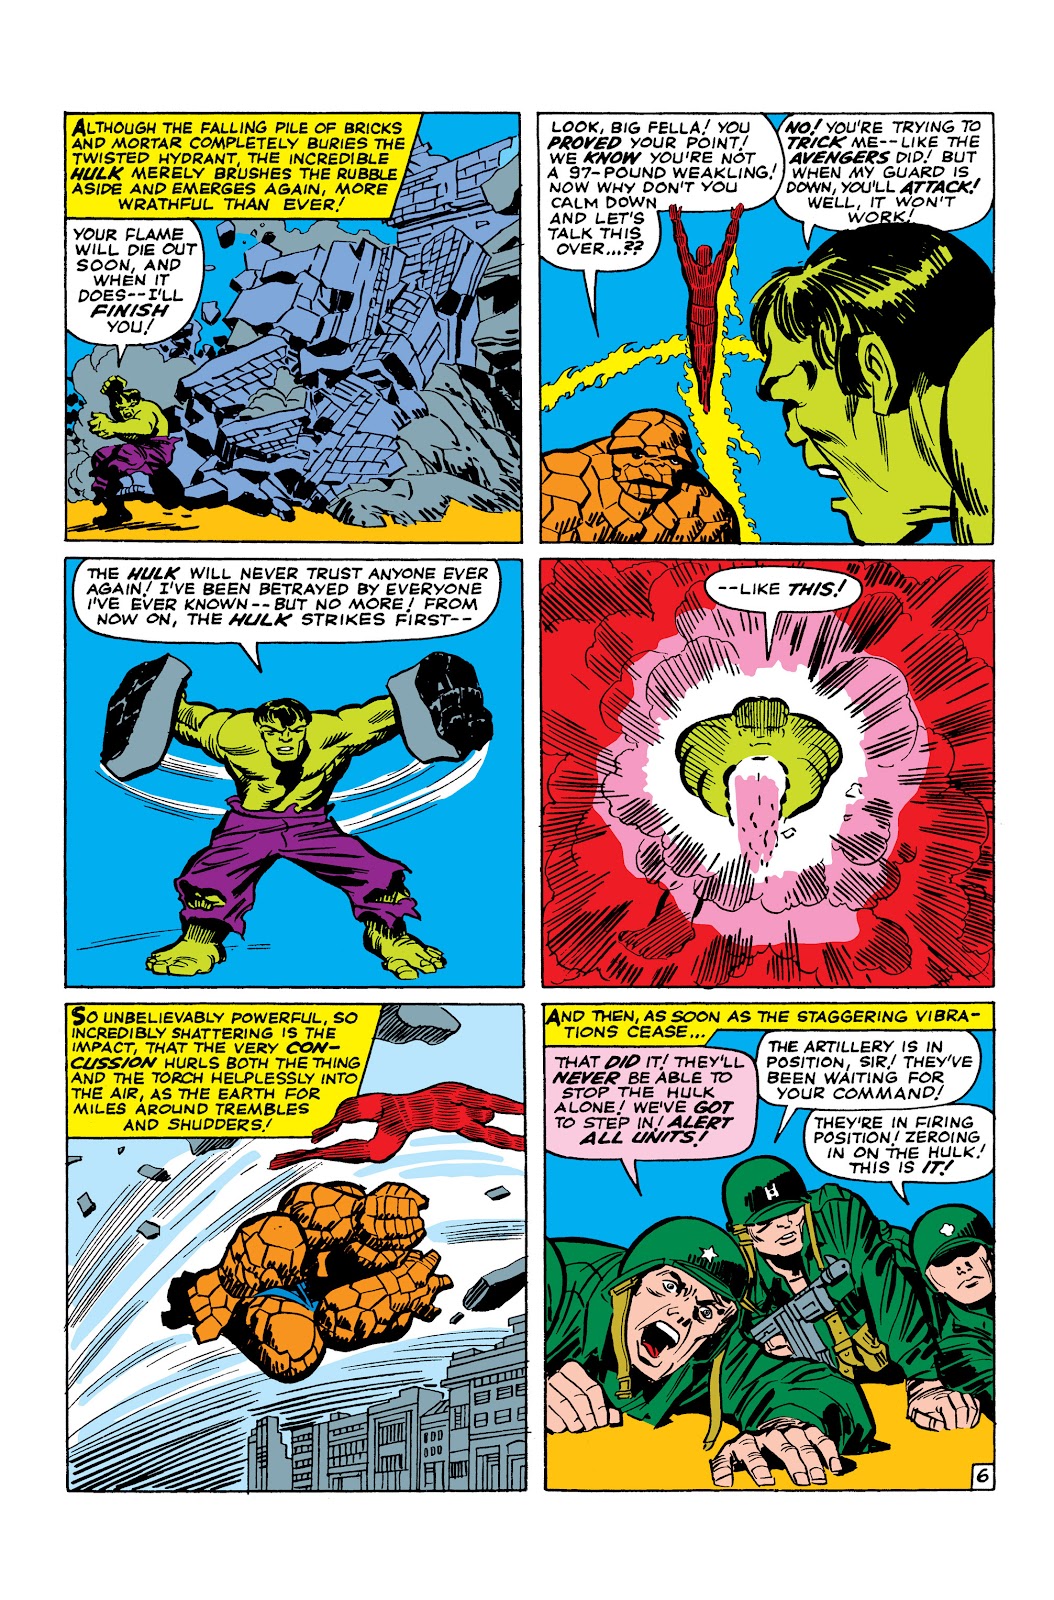 Read online Marvel Masterworks: The Fantastic Four comic - Issue # TPB 3 (Part 2) - 26